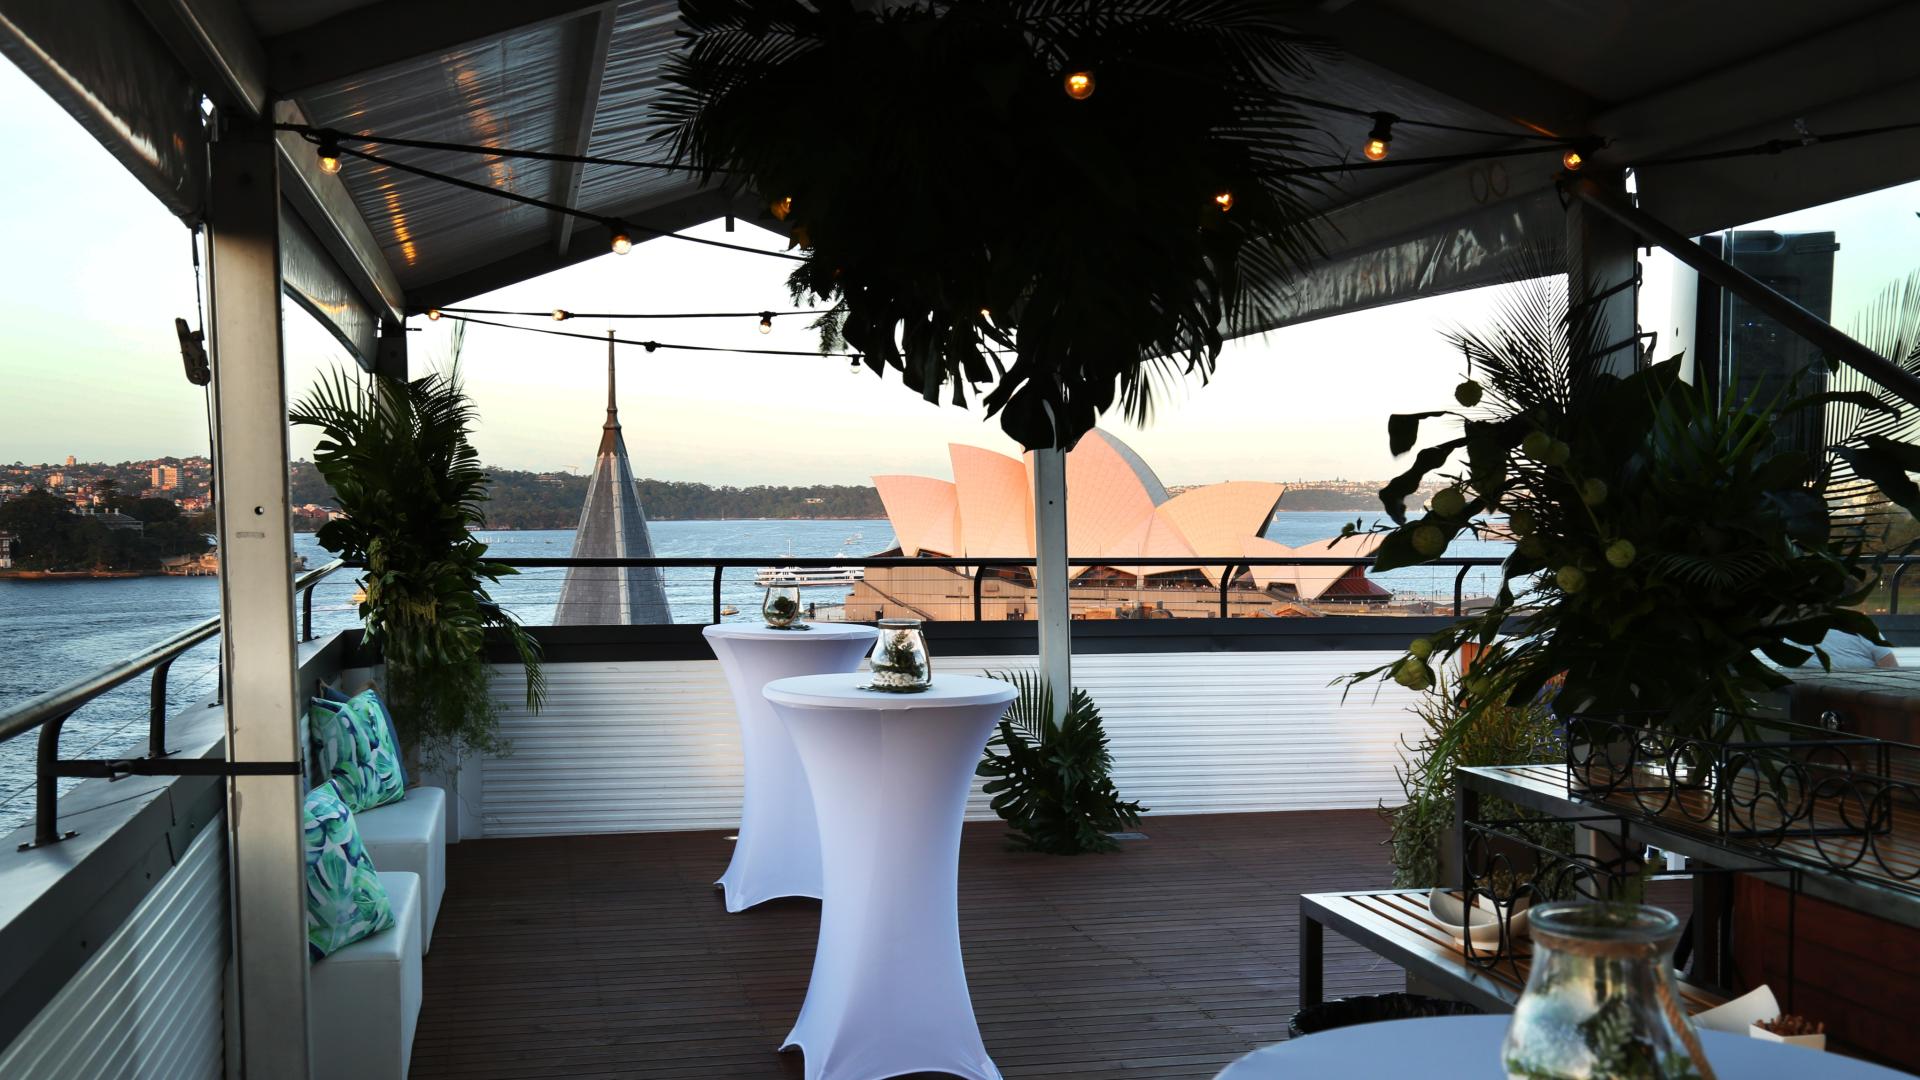 Find your Corporate Party Venue in Sydney